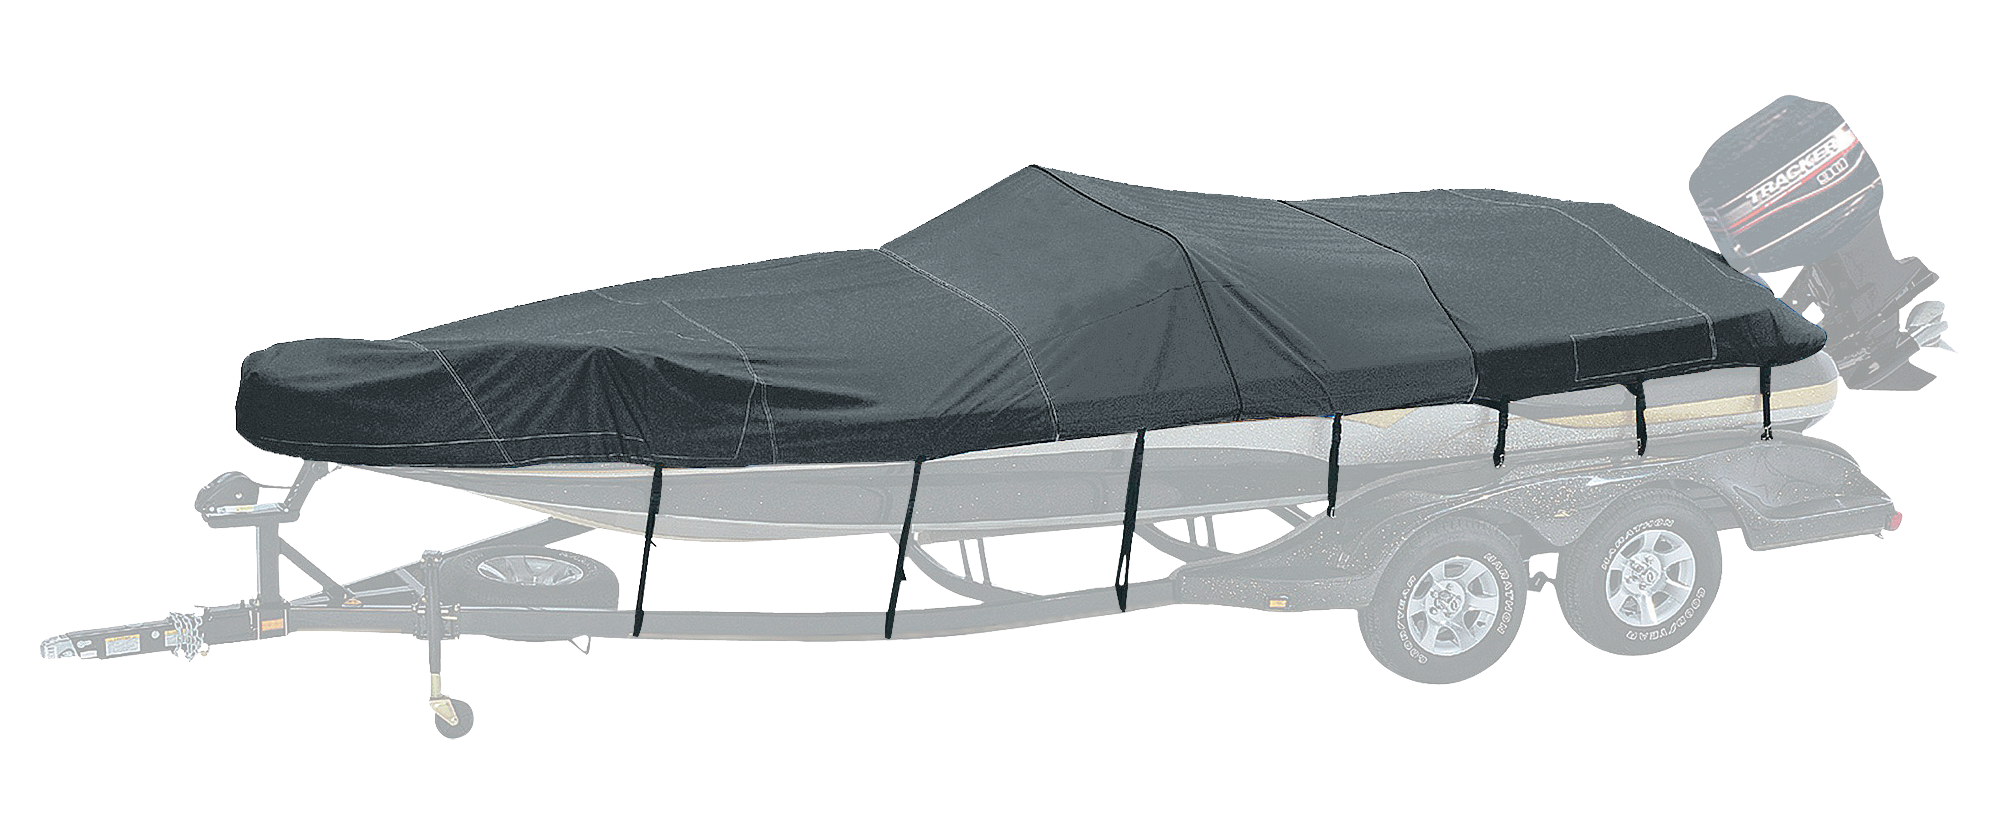 Bass Pro Shops Exact Fit Boat Cover by Westland - Tahoe - 2005 228 Deckboat I/O with Tower - Charcoal